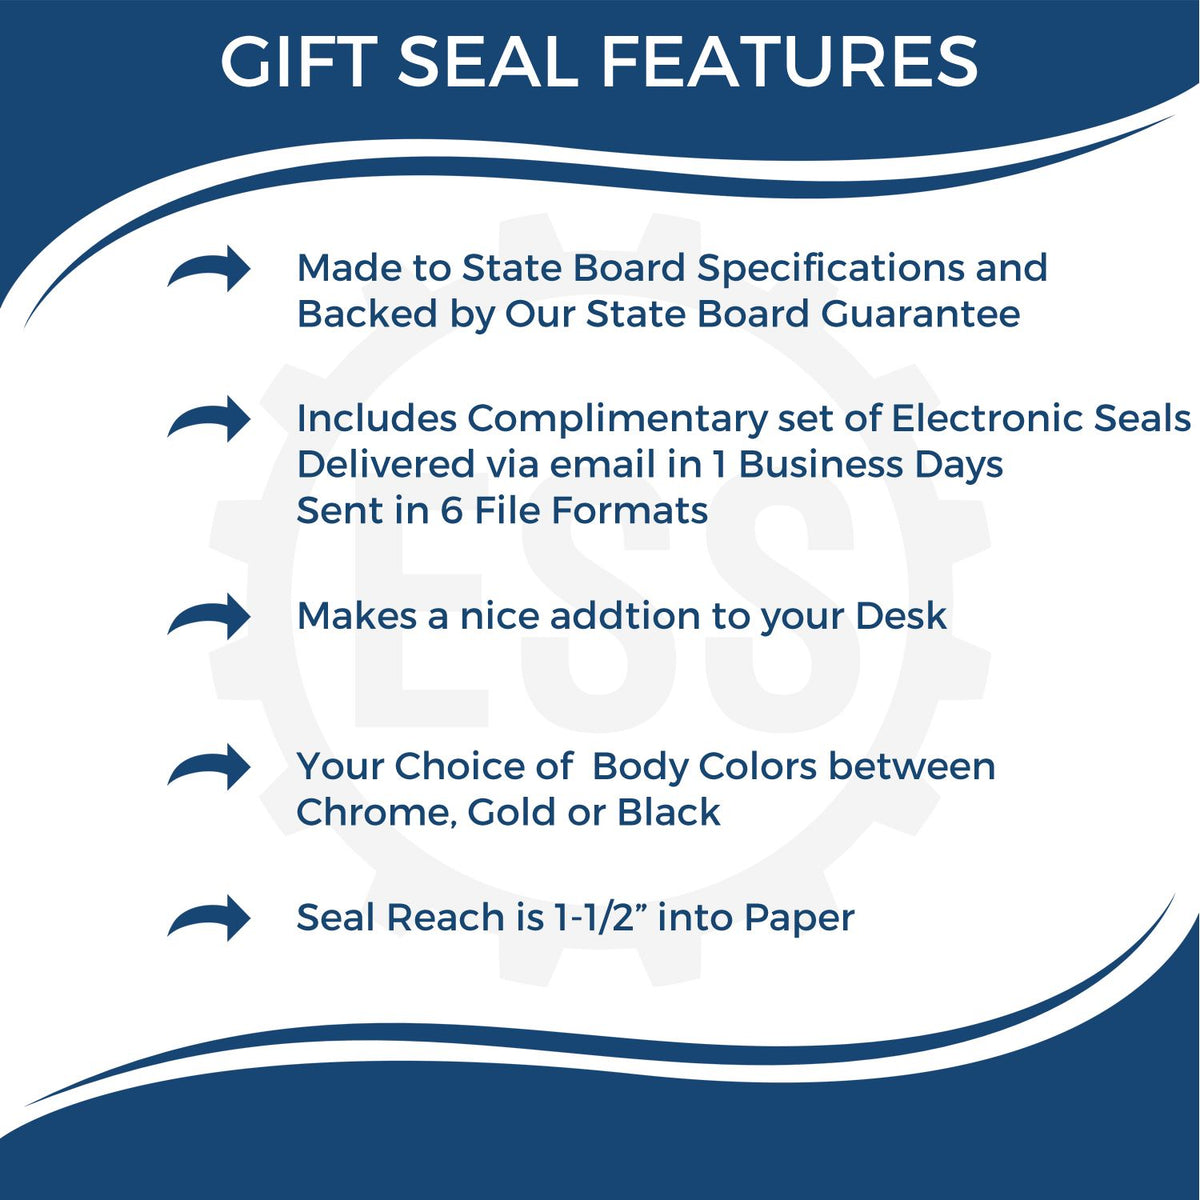 A picture of an infographic highlighting the selling points for the Gift Illinois Geologist Seal